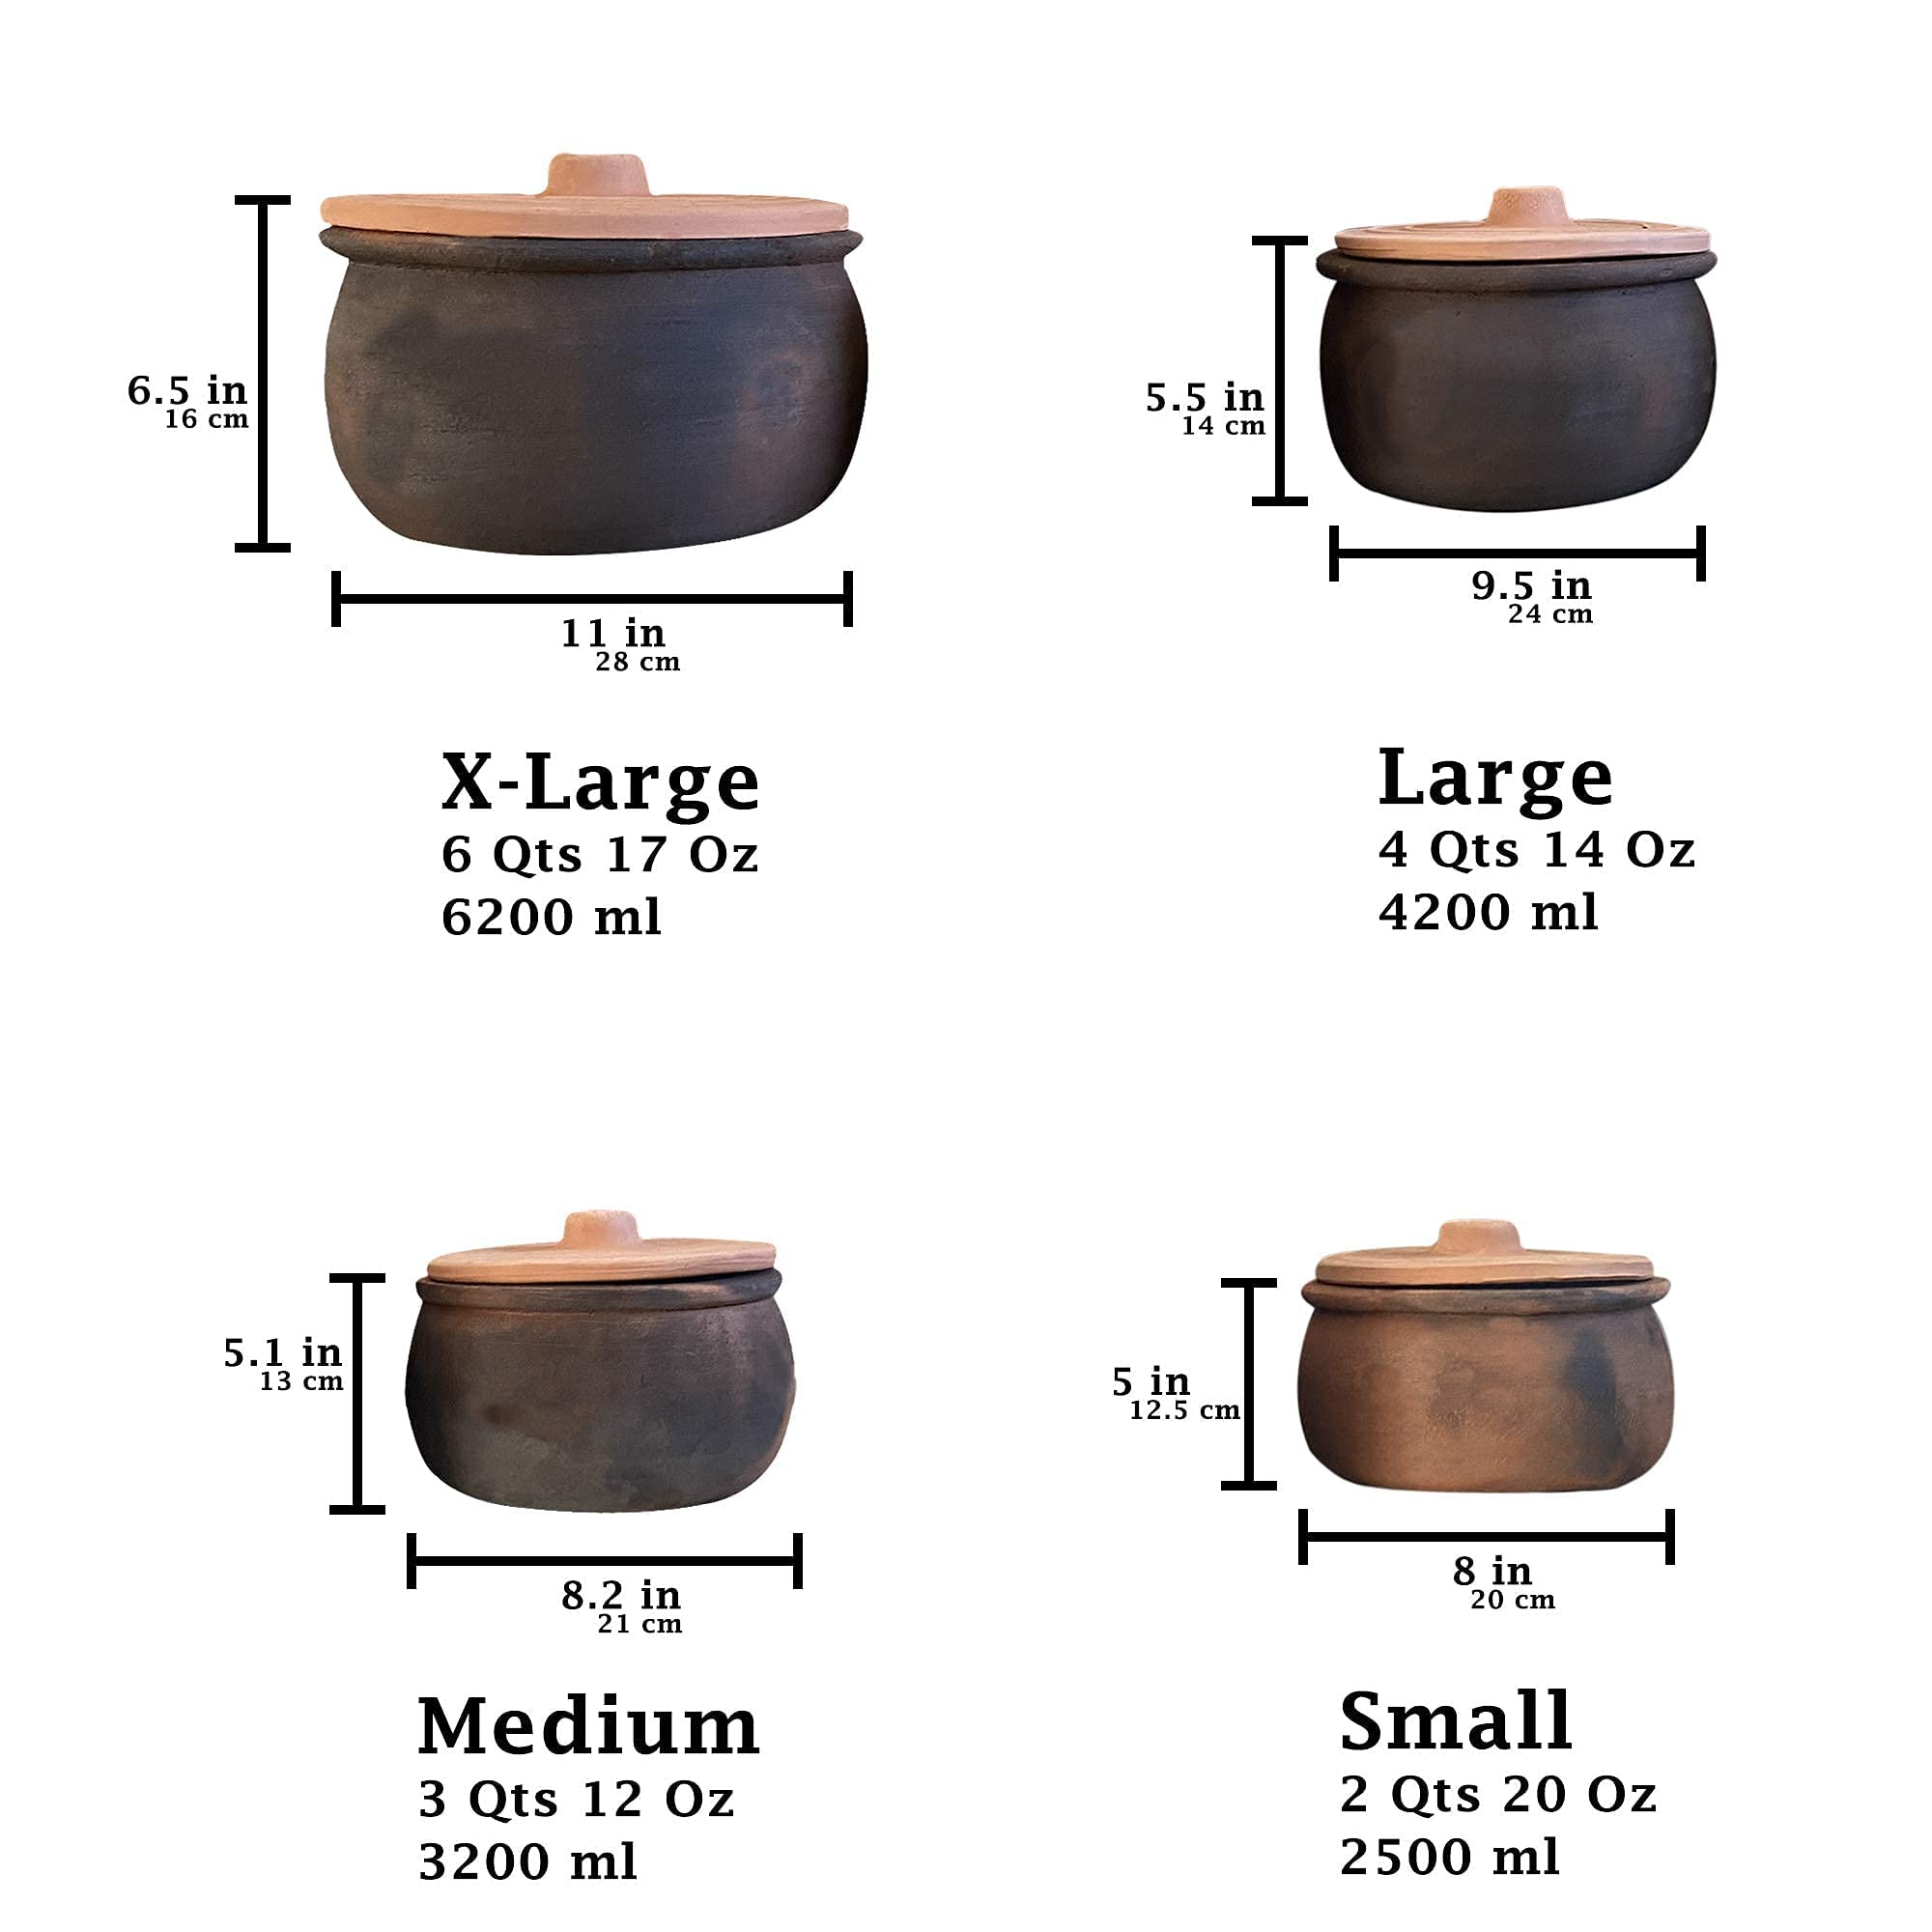 Clay Cooking Pots with Lids, Clay Pots for Cooking, UNGLAZED Earthenware Rice Pots, Twice Baked Traditional Casserole for Cooking on STOVE Top, Vintage Portuguese Terracotta Roaster (Extra Large)